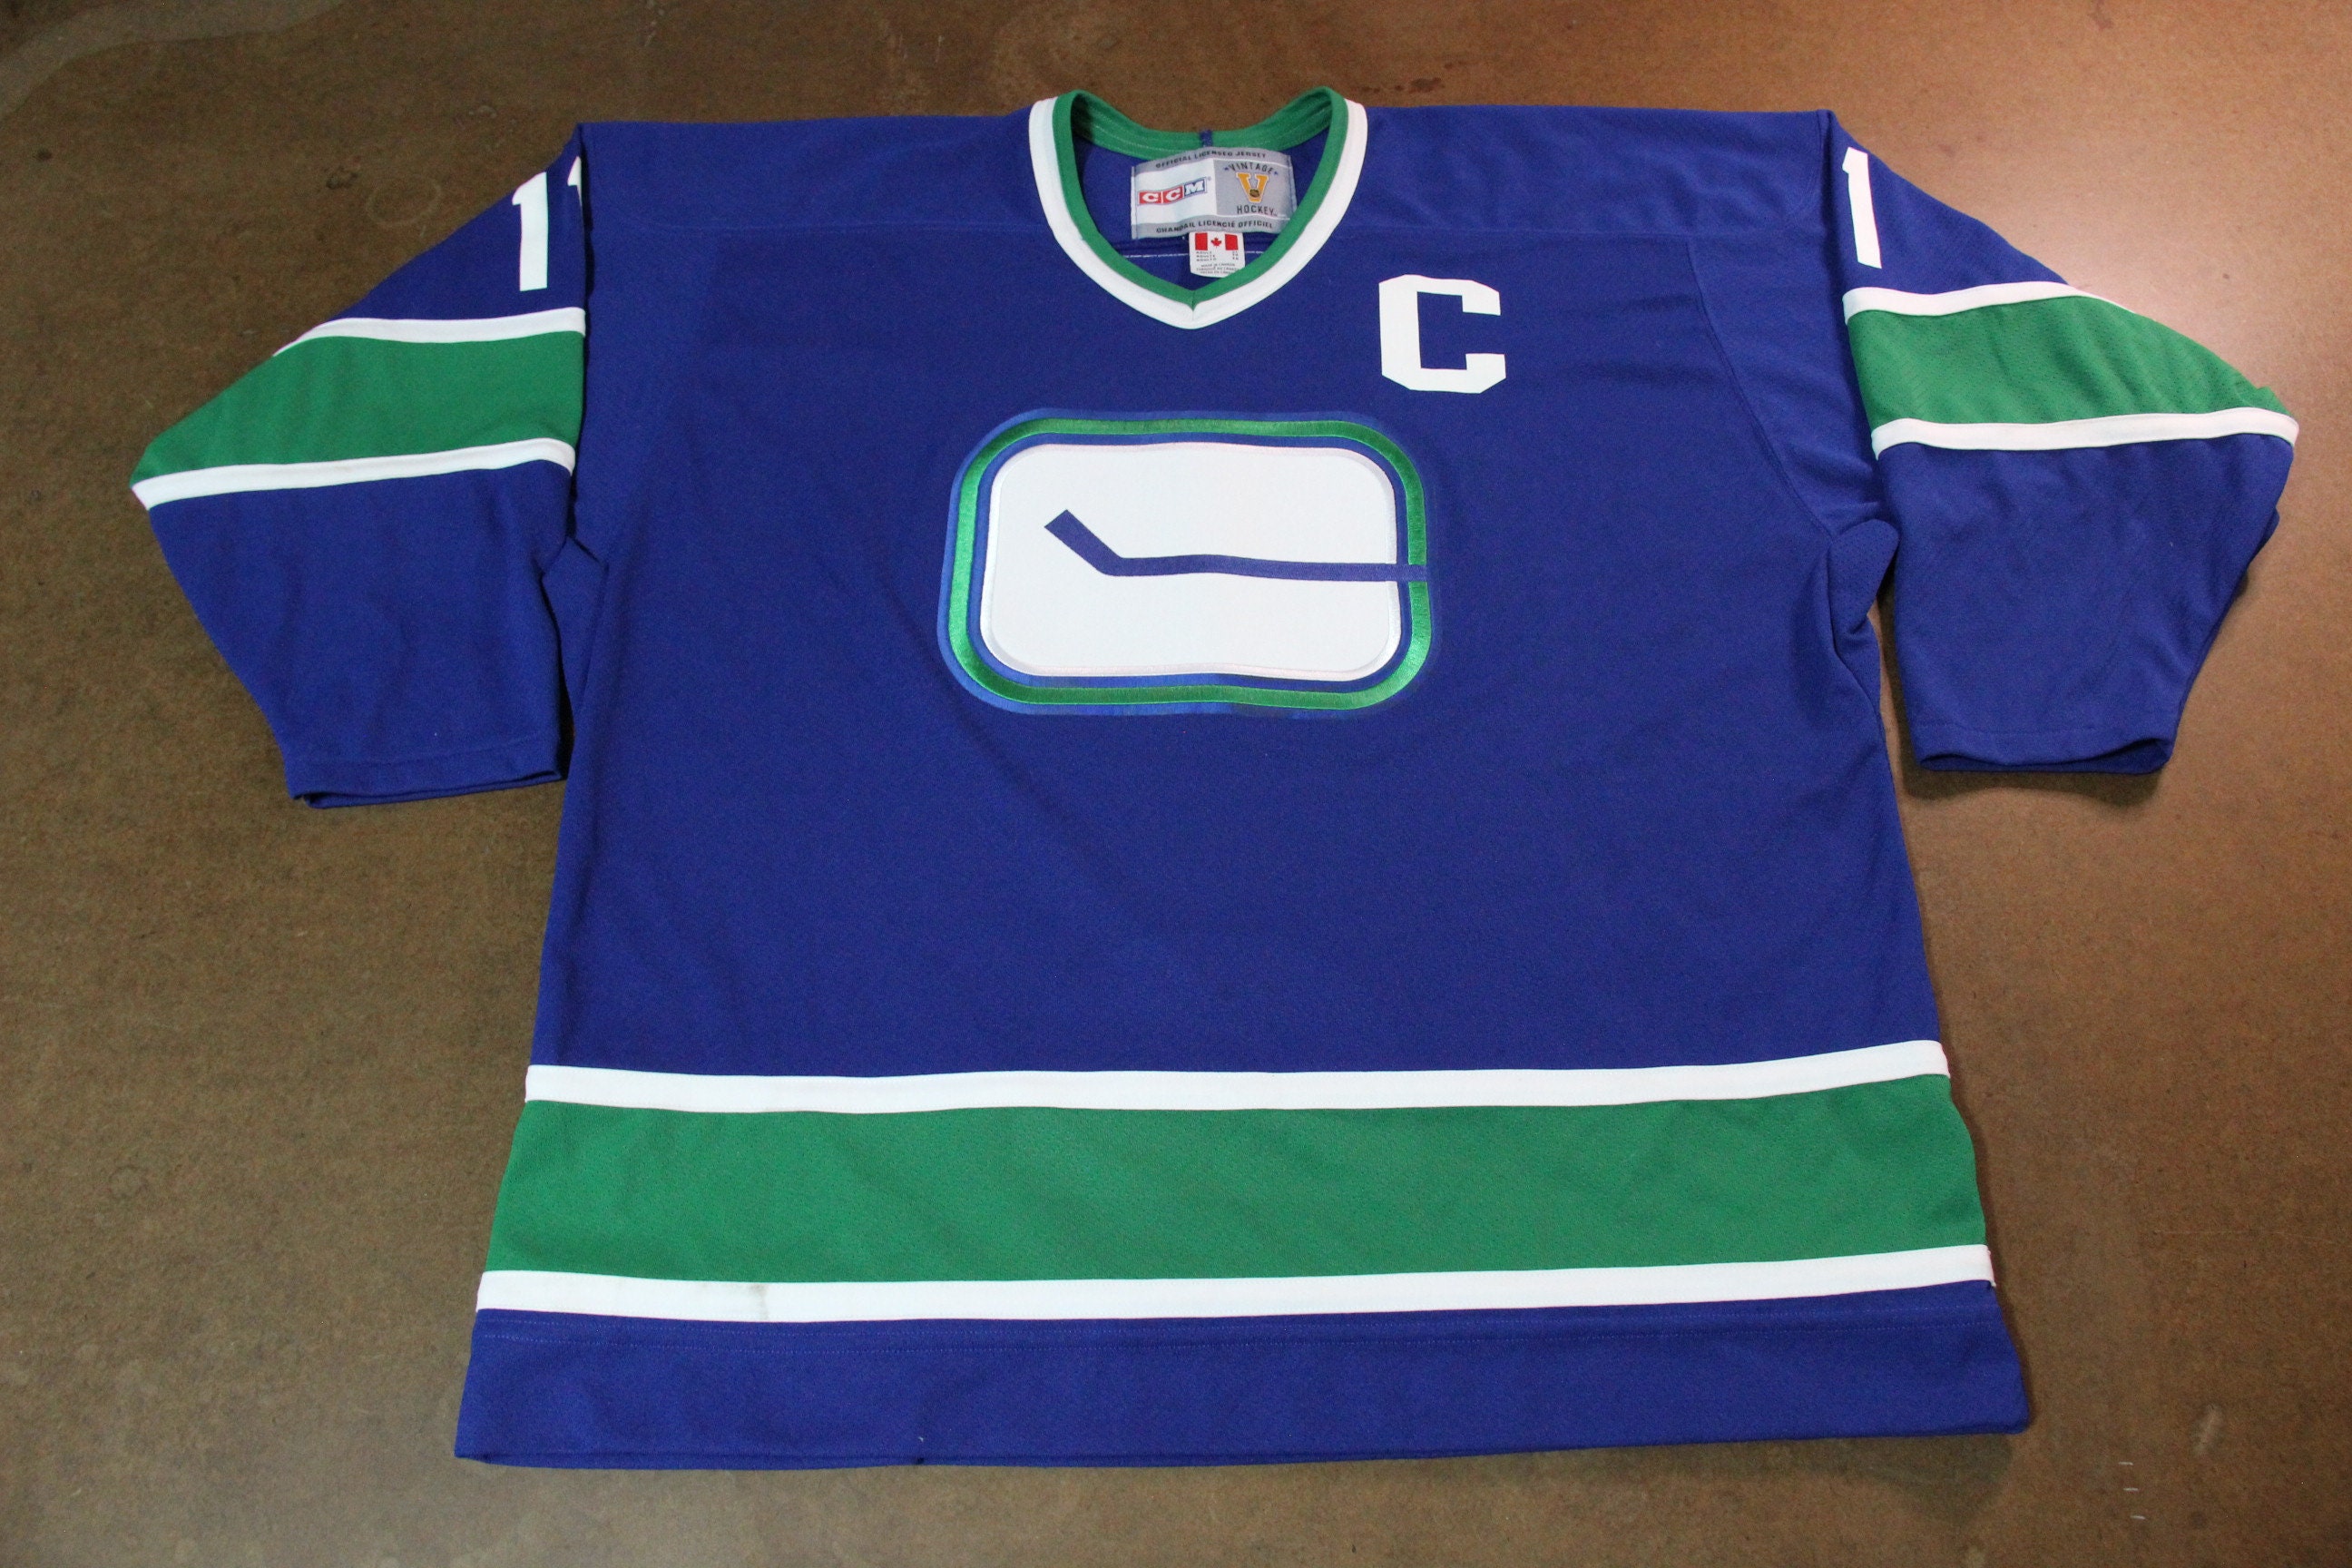 Six Balloons Vintage Delights: Vintage Vancouver Canucks CCM Hockey Jersey